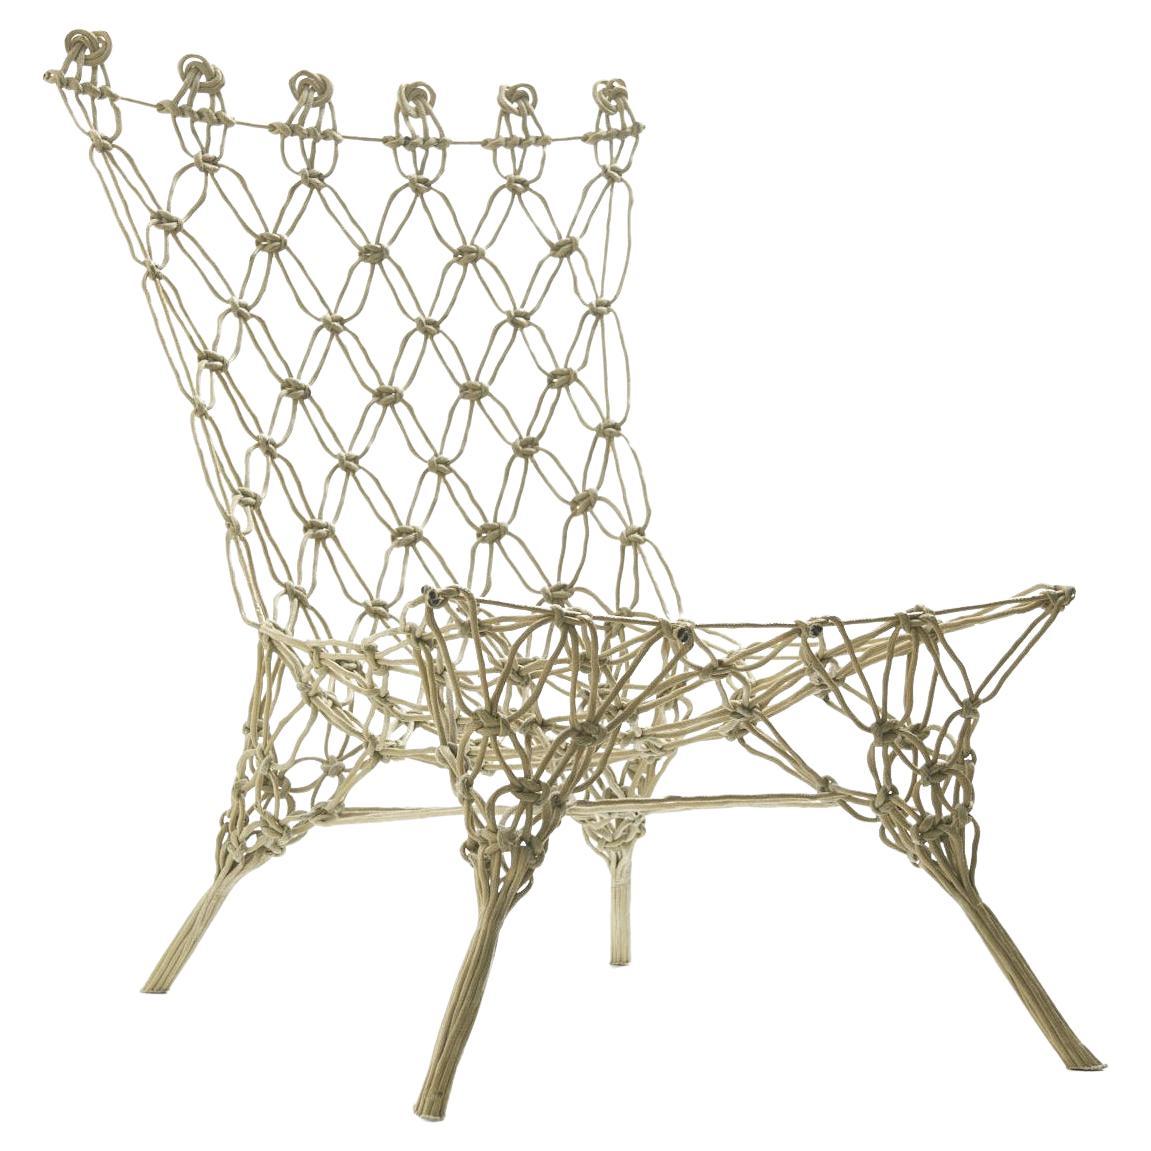 RARE MARCEL WANDERS DROOG DESIGN KNOTTED CHAIR @ 1998